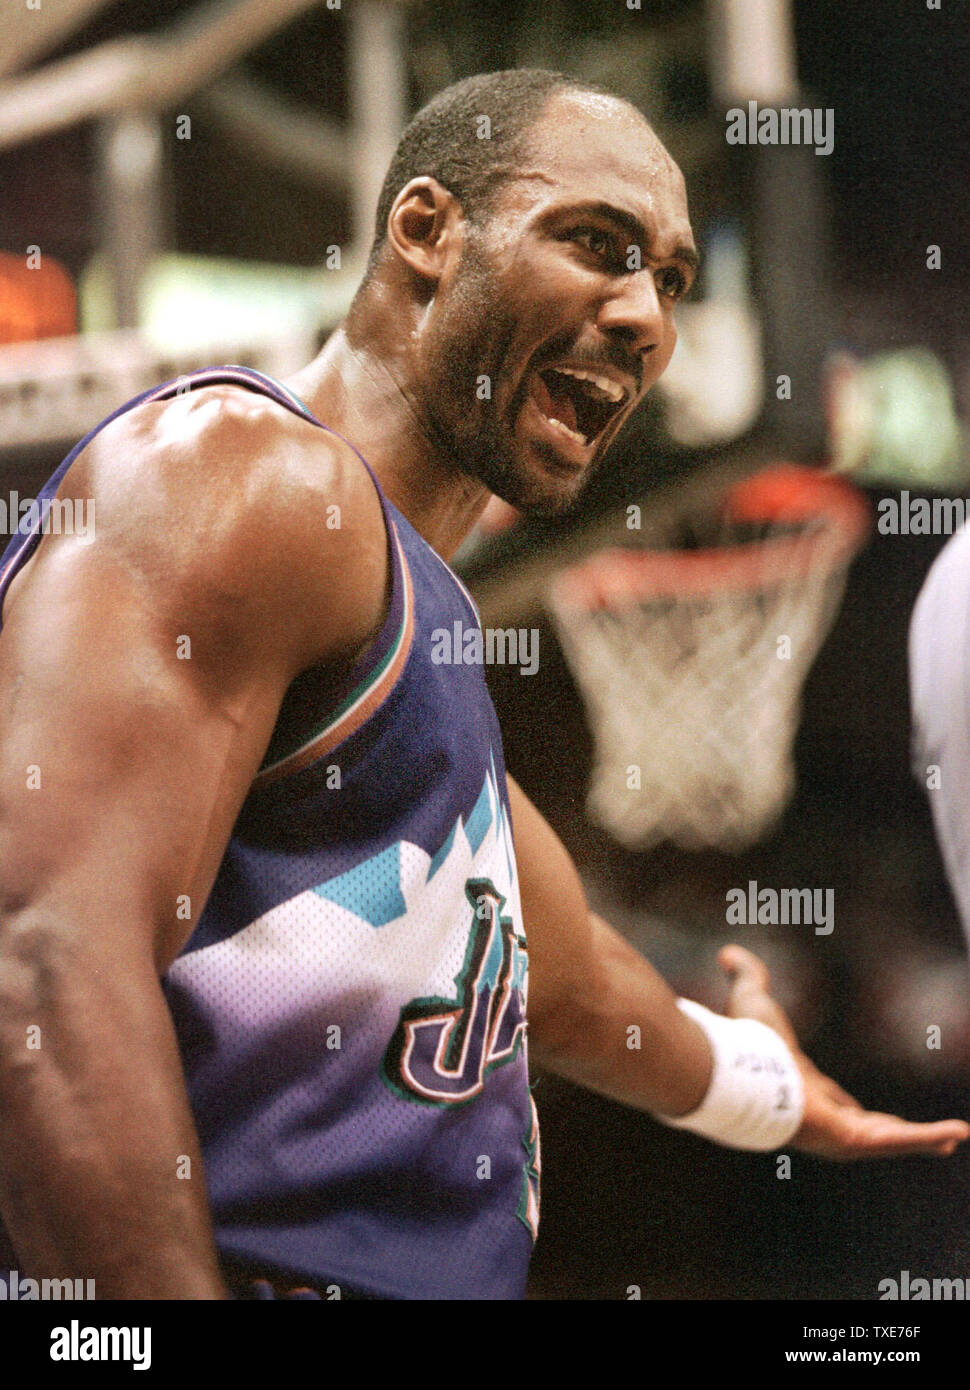 SAP2000011004-10 JANUARY 2000-SAN ANTONIO, TEXAS, USA; Karl Malone of the Utah Jazz didn't agree with a call made by the official in the 3rd quarter of their matchup against San Antonio. The Spurs rallied to defeat the Jazz 93-86.  jm/Joe Mitchell UPI Stock Photo